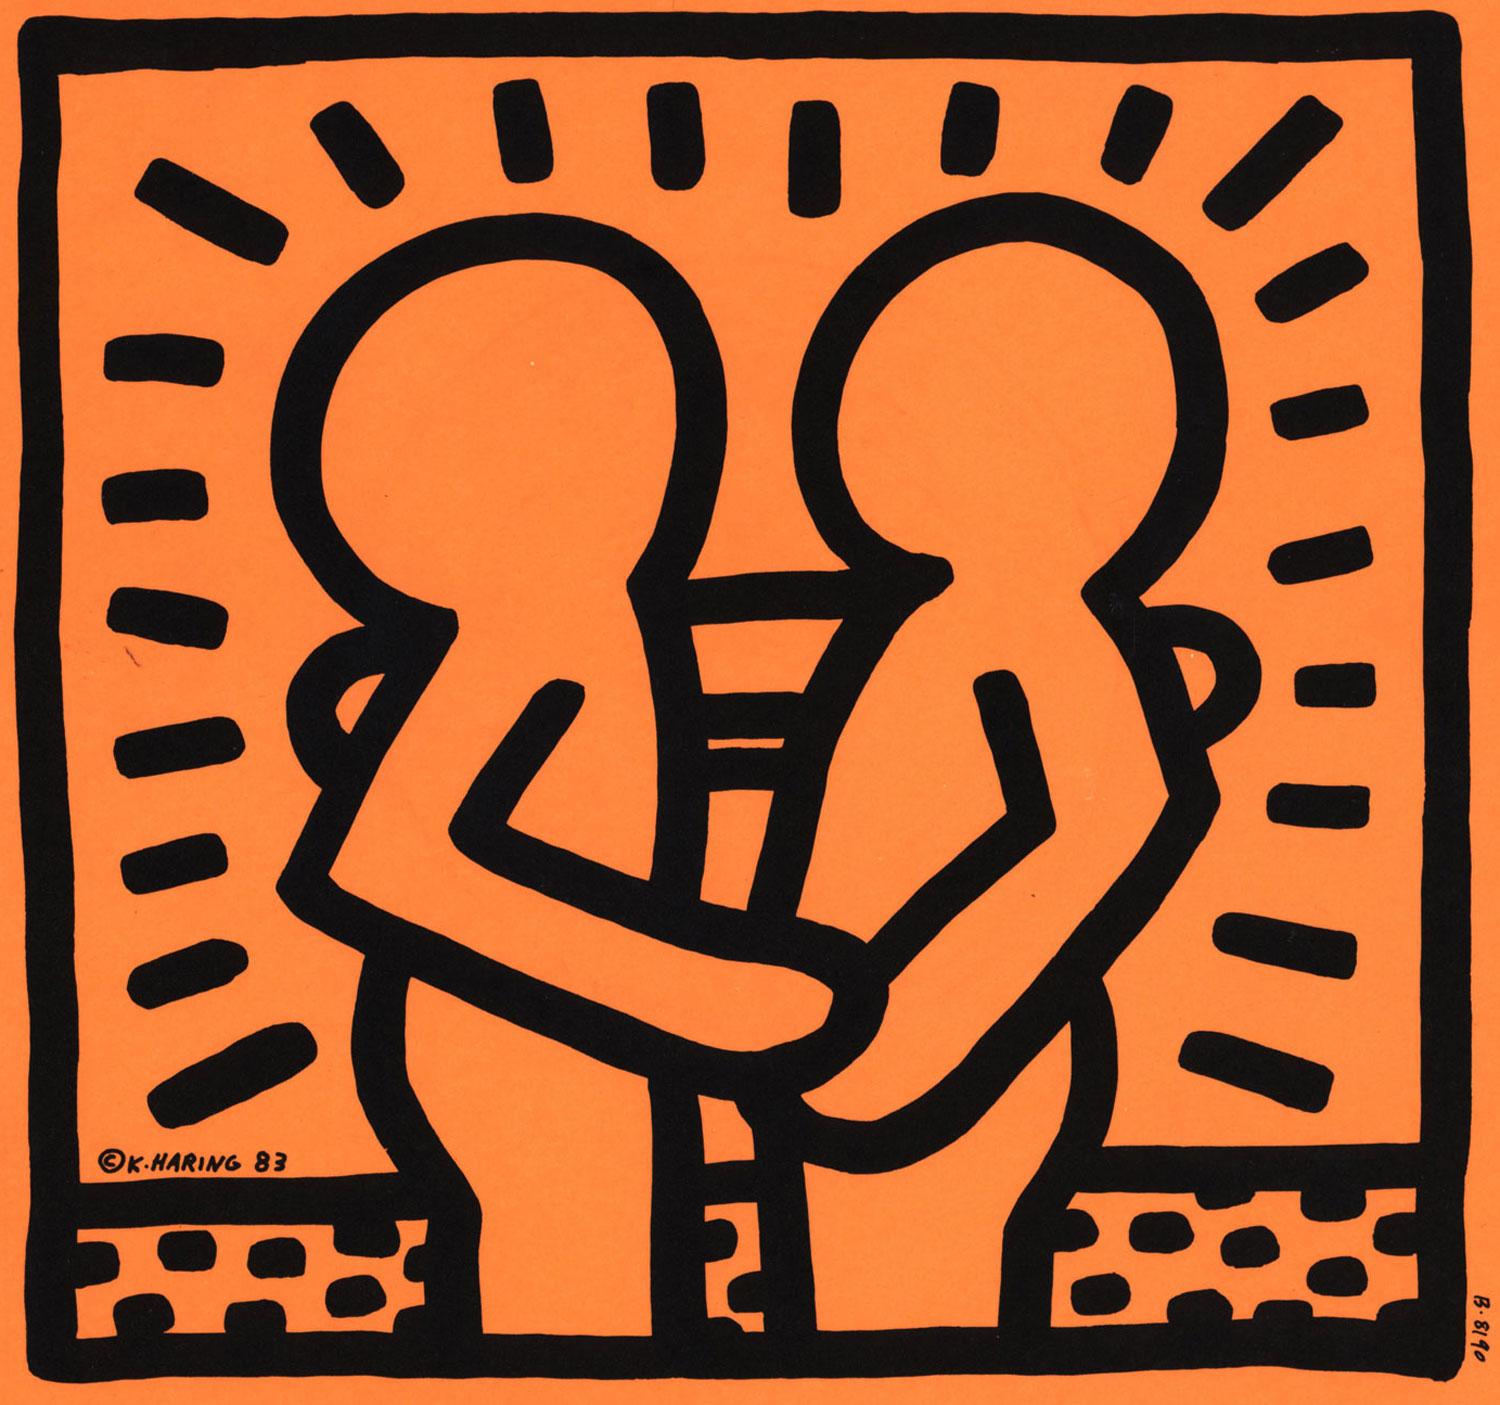 1980s Keith Haring Record Art:
David BOWIE 